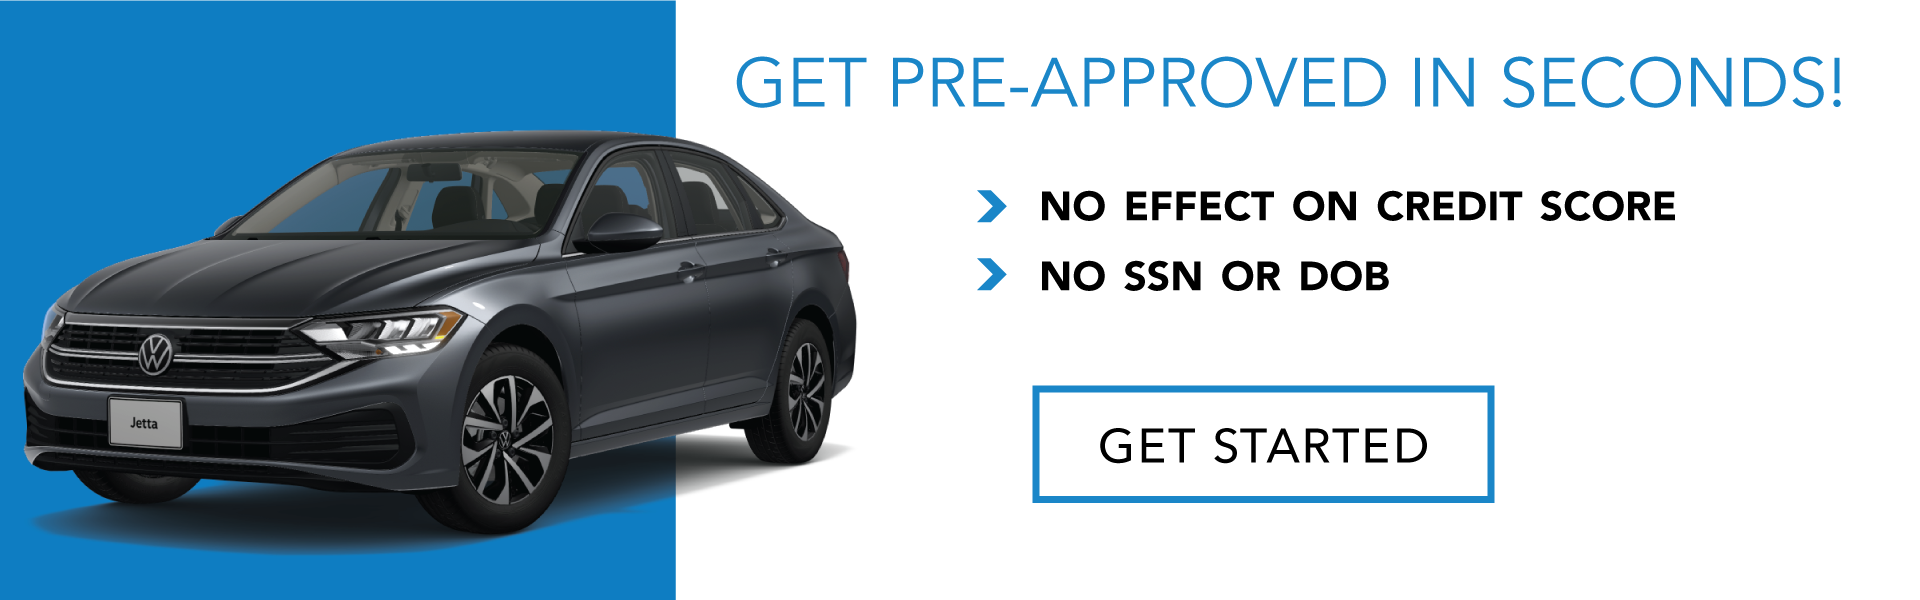 Get Pre-Approved in Seconds